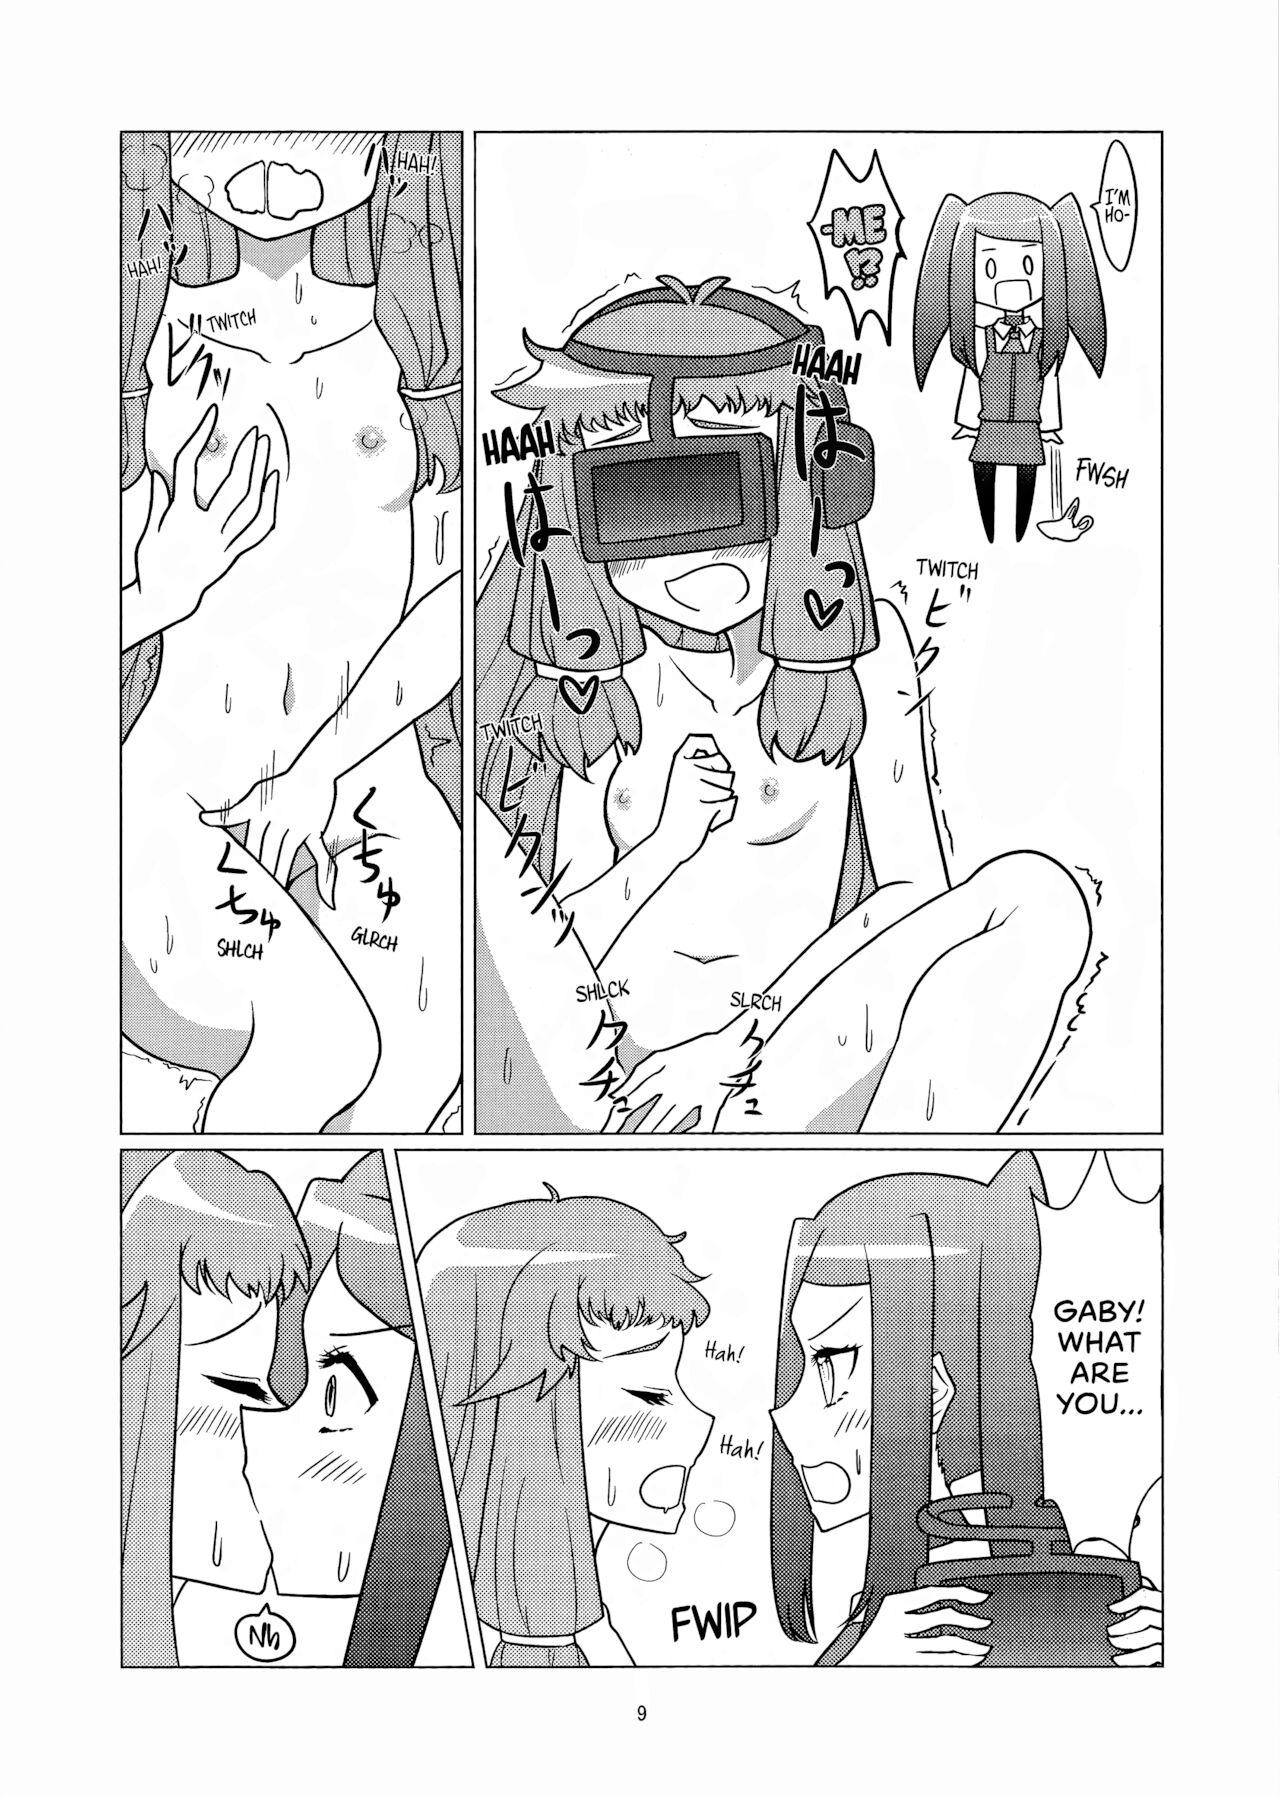 Spit Angel's Share - Va-11 hall-a Pussy - Page 8